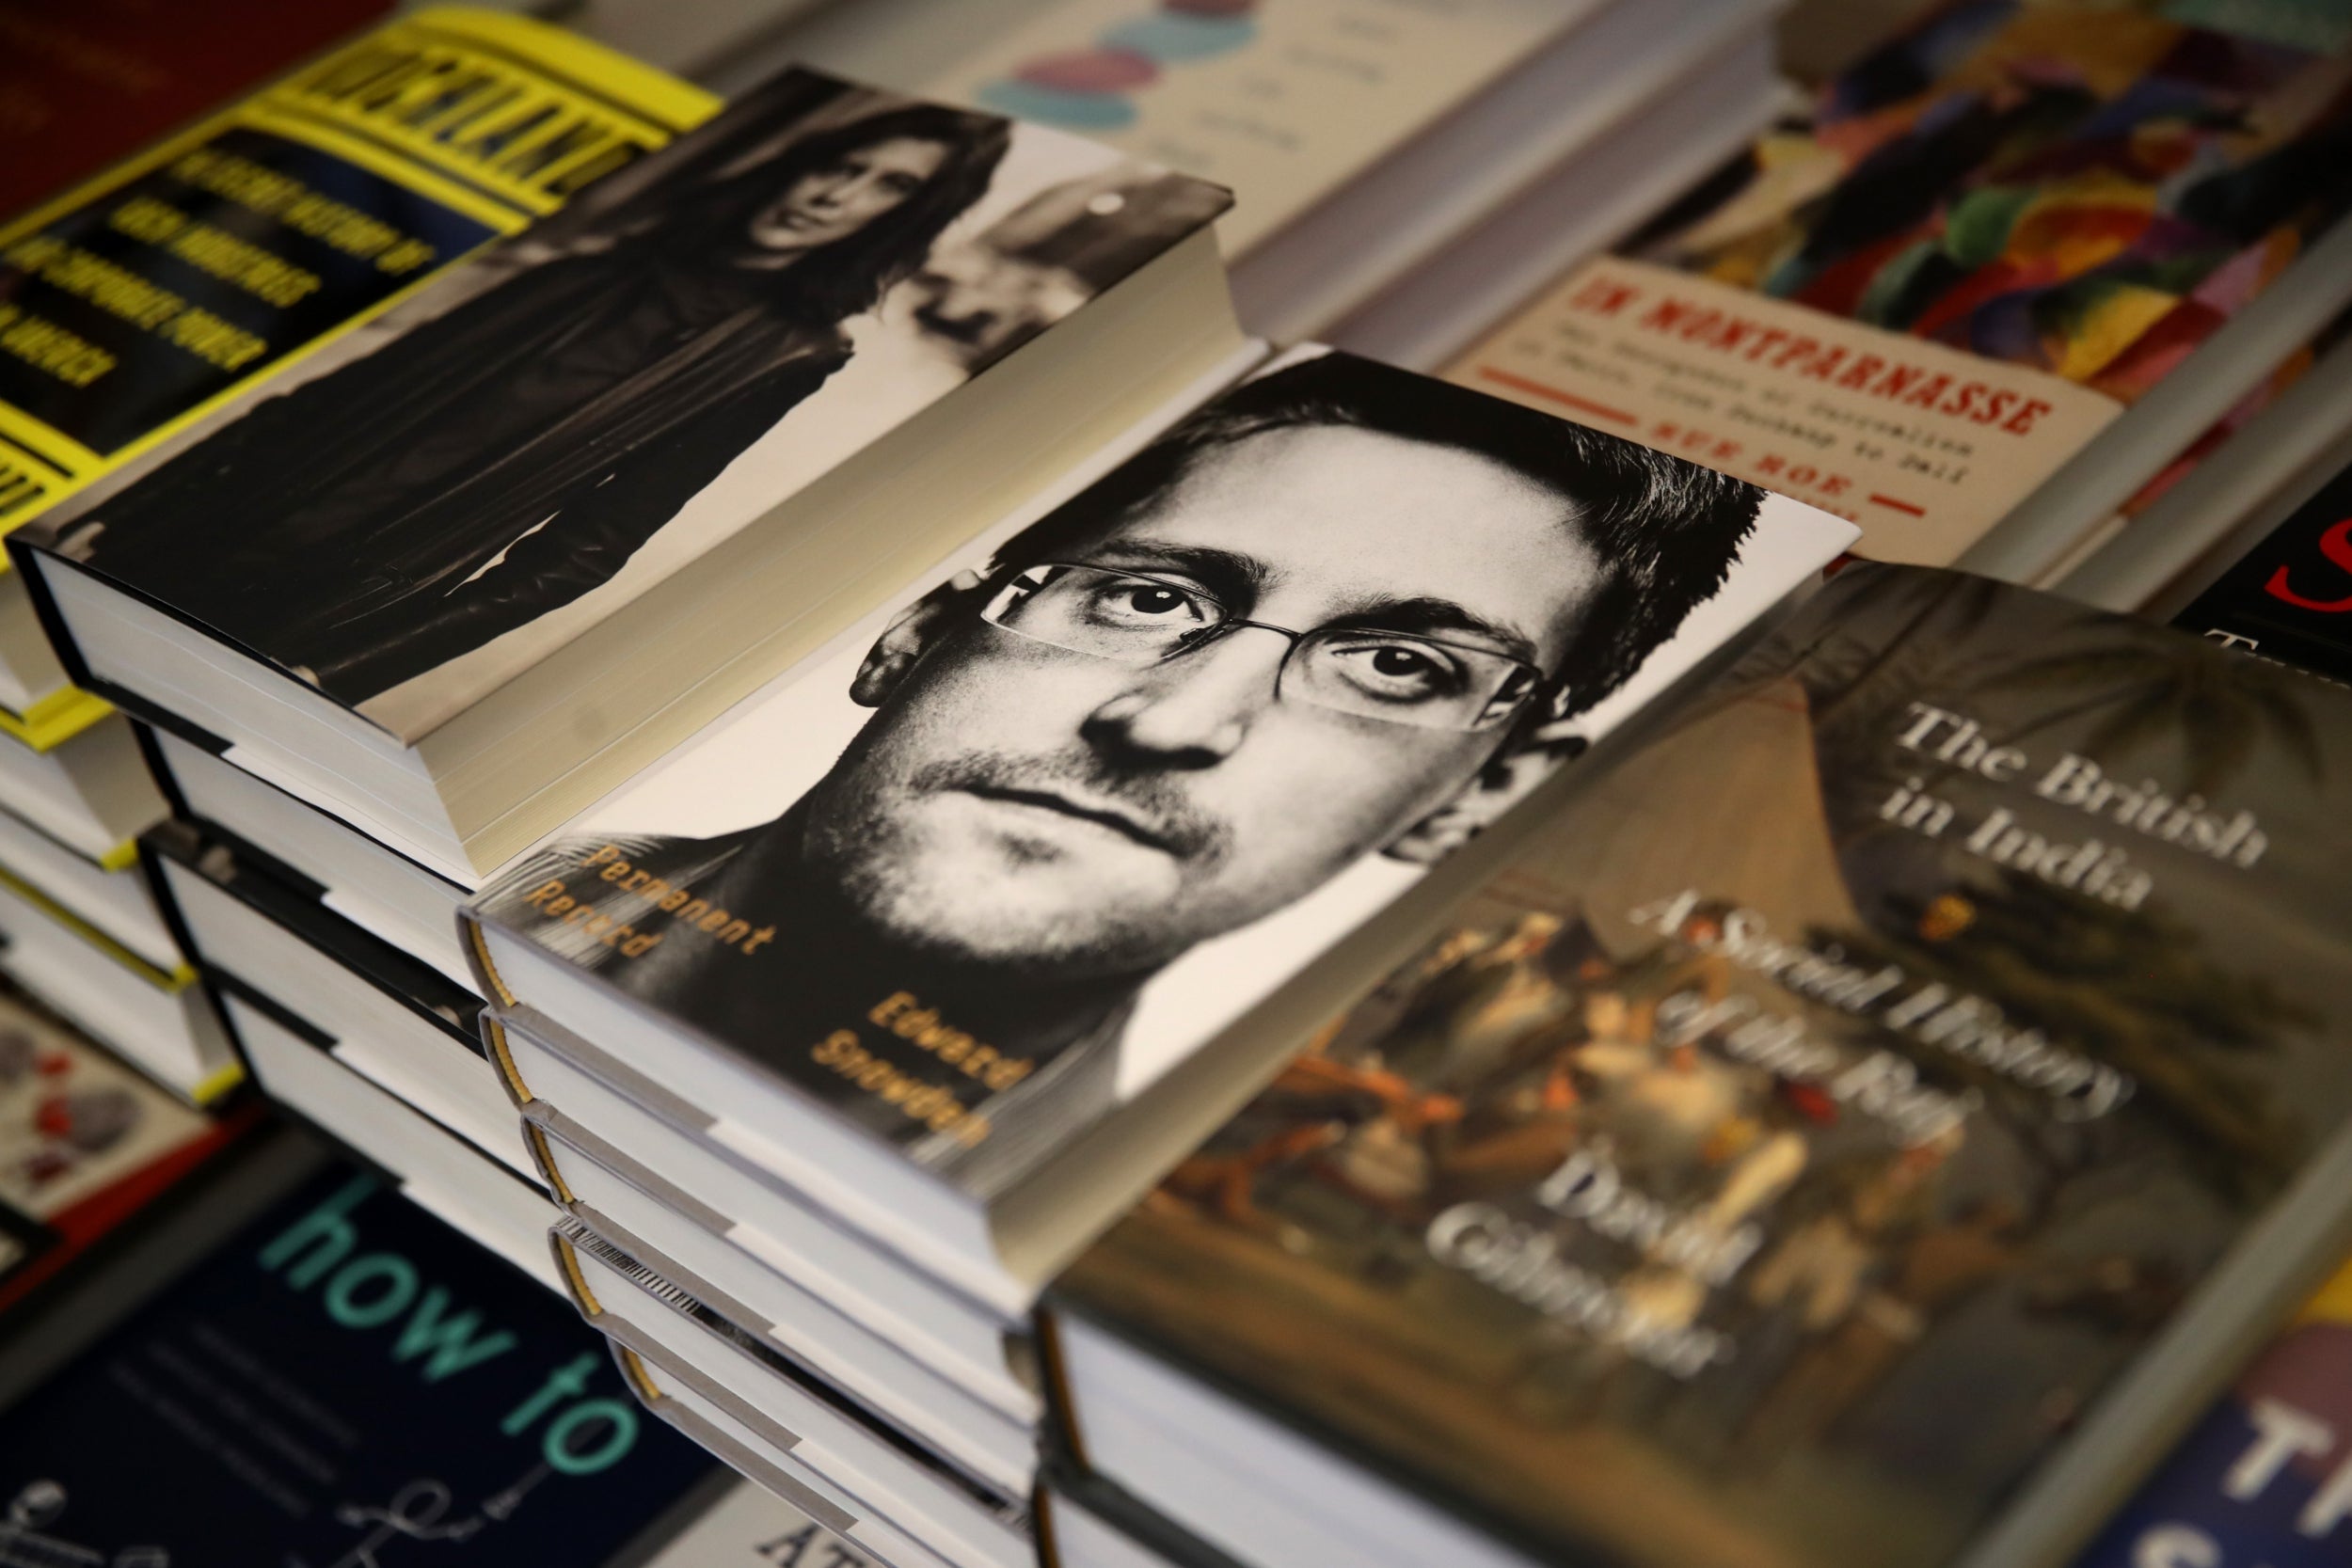 US sues Edward Snowden over new autobiography describing how he leaked top-secret files